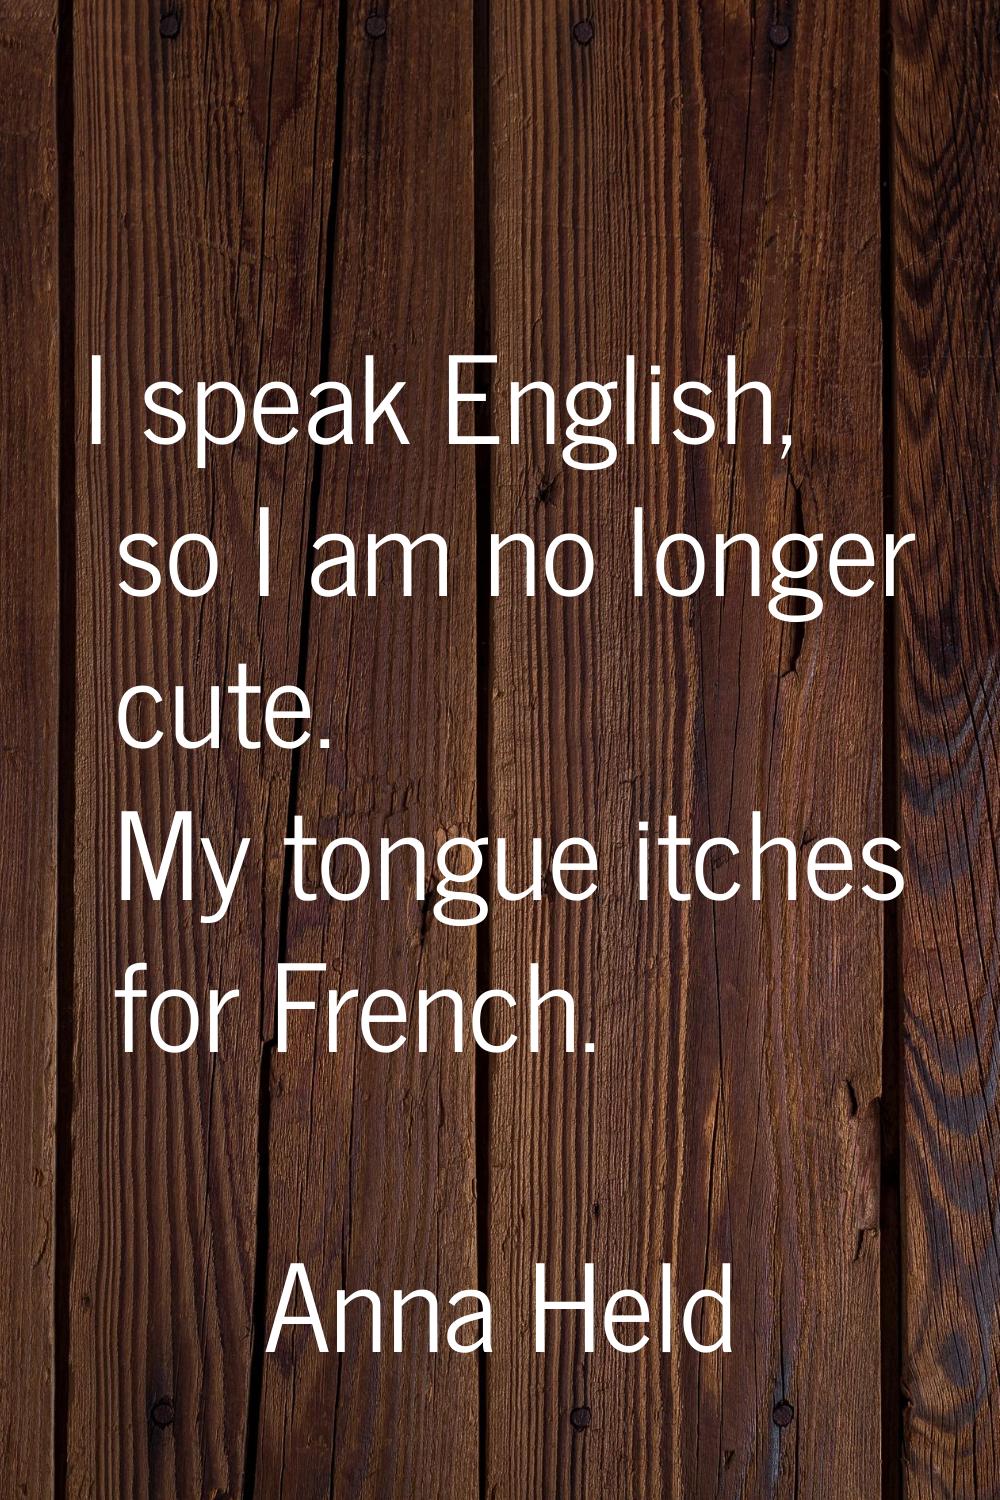 I speak English, so I am no longer cute. My tongue itches for French.